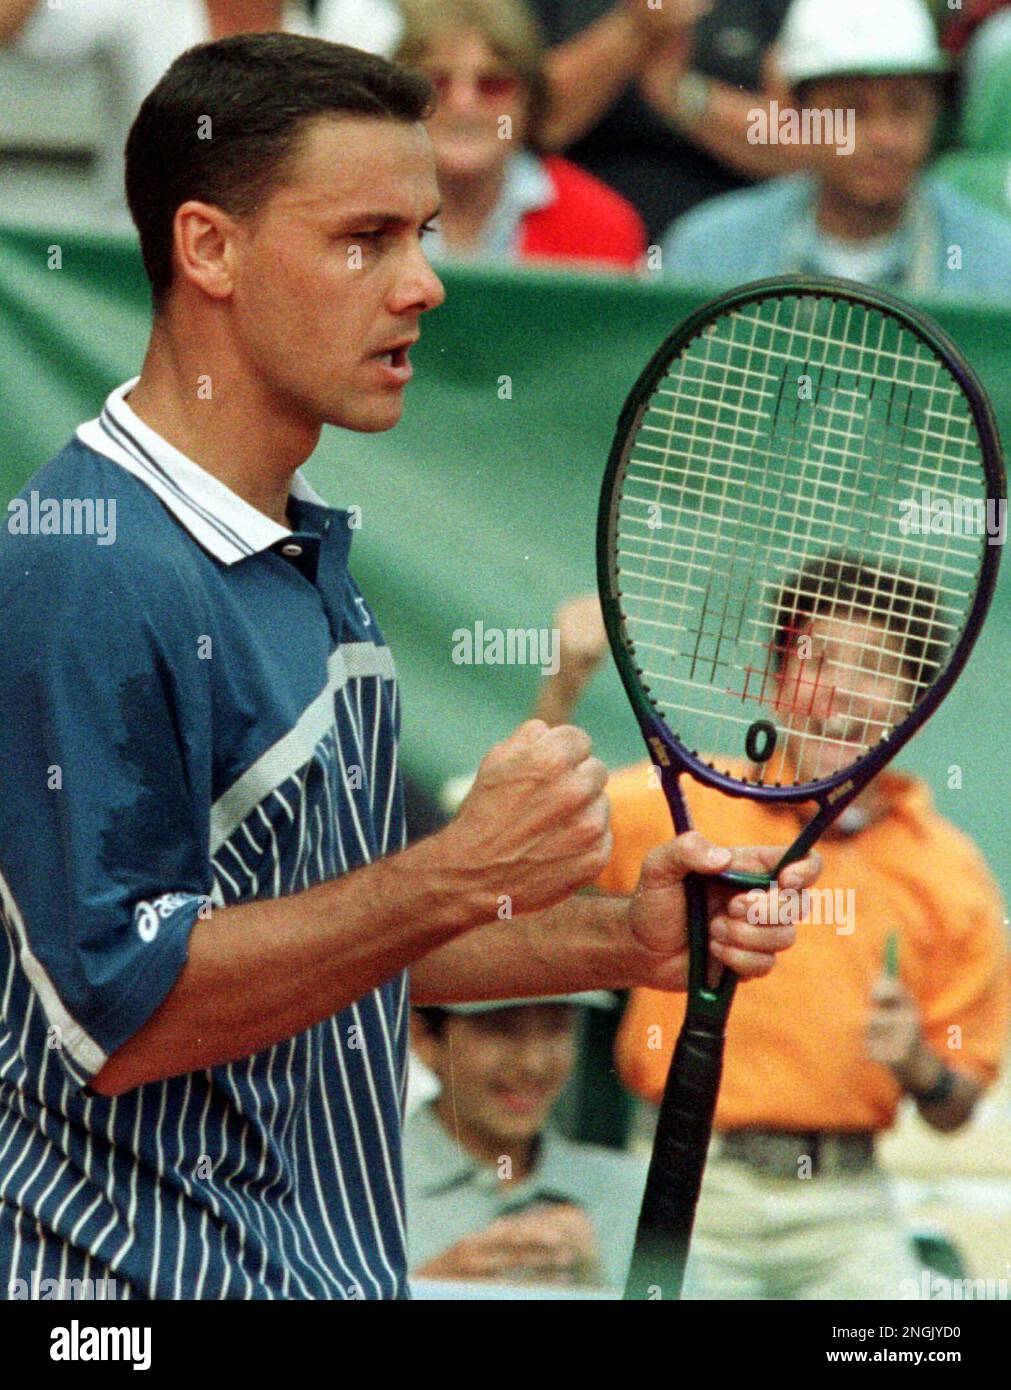 Italian player Renzo Furlan jubilates after winning his first round match  against Germany's player Boris Becker in the Monte Carlo tennis Open, in  Monaco, Tuesday, April 22,1997. Furlan won 1-6. 6-3, 7-6. (